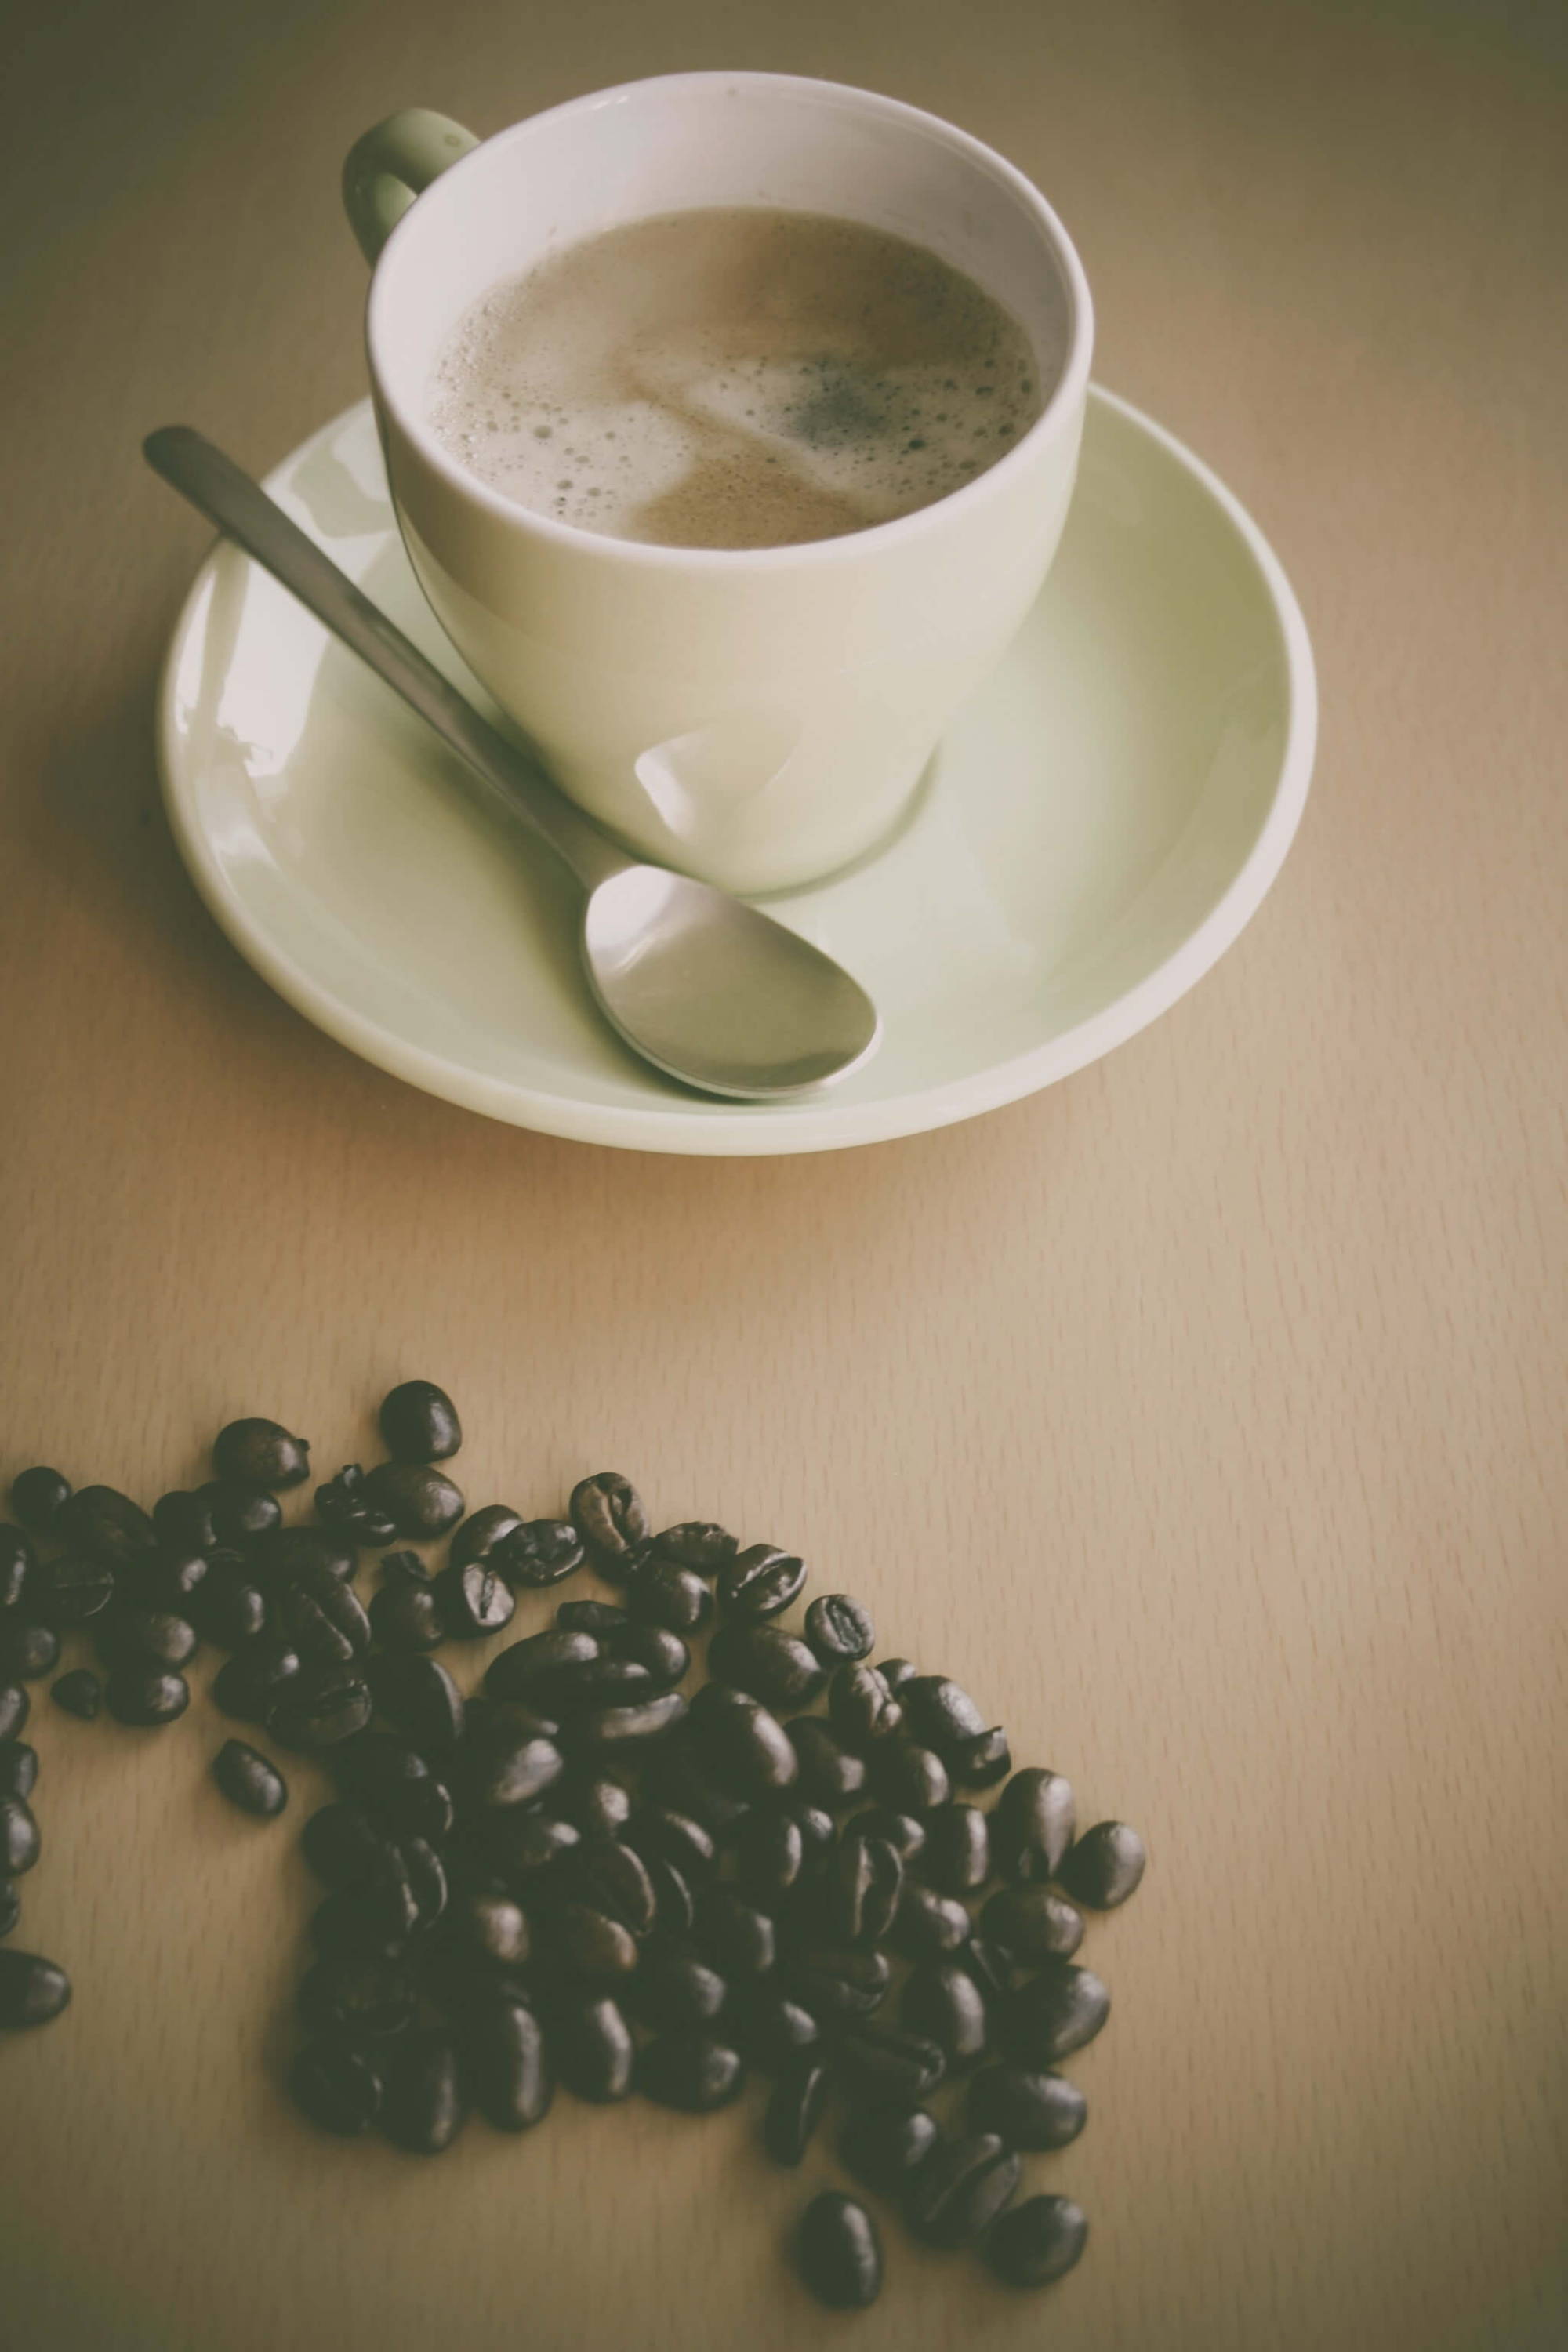 Coffee with coffee beans